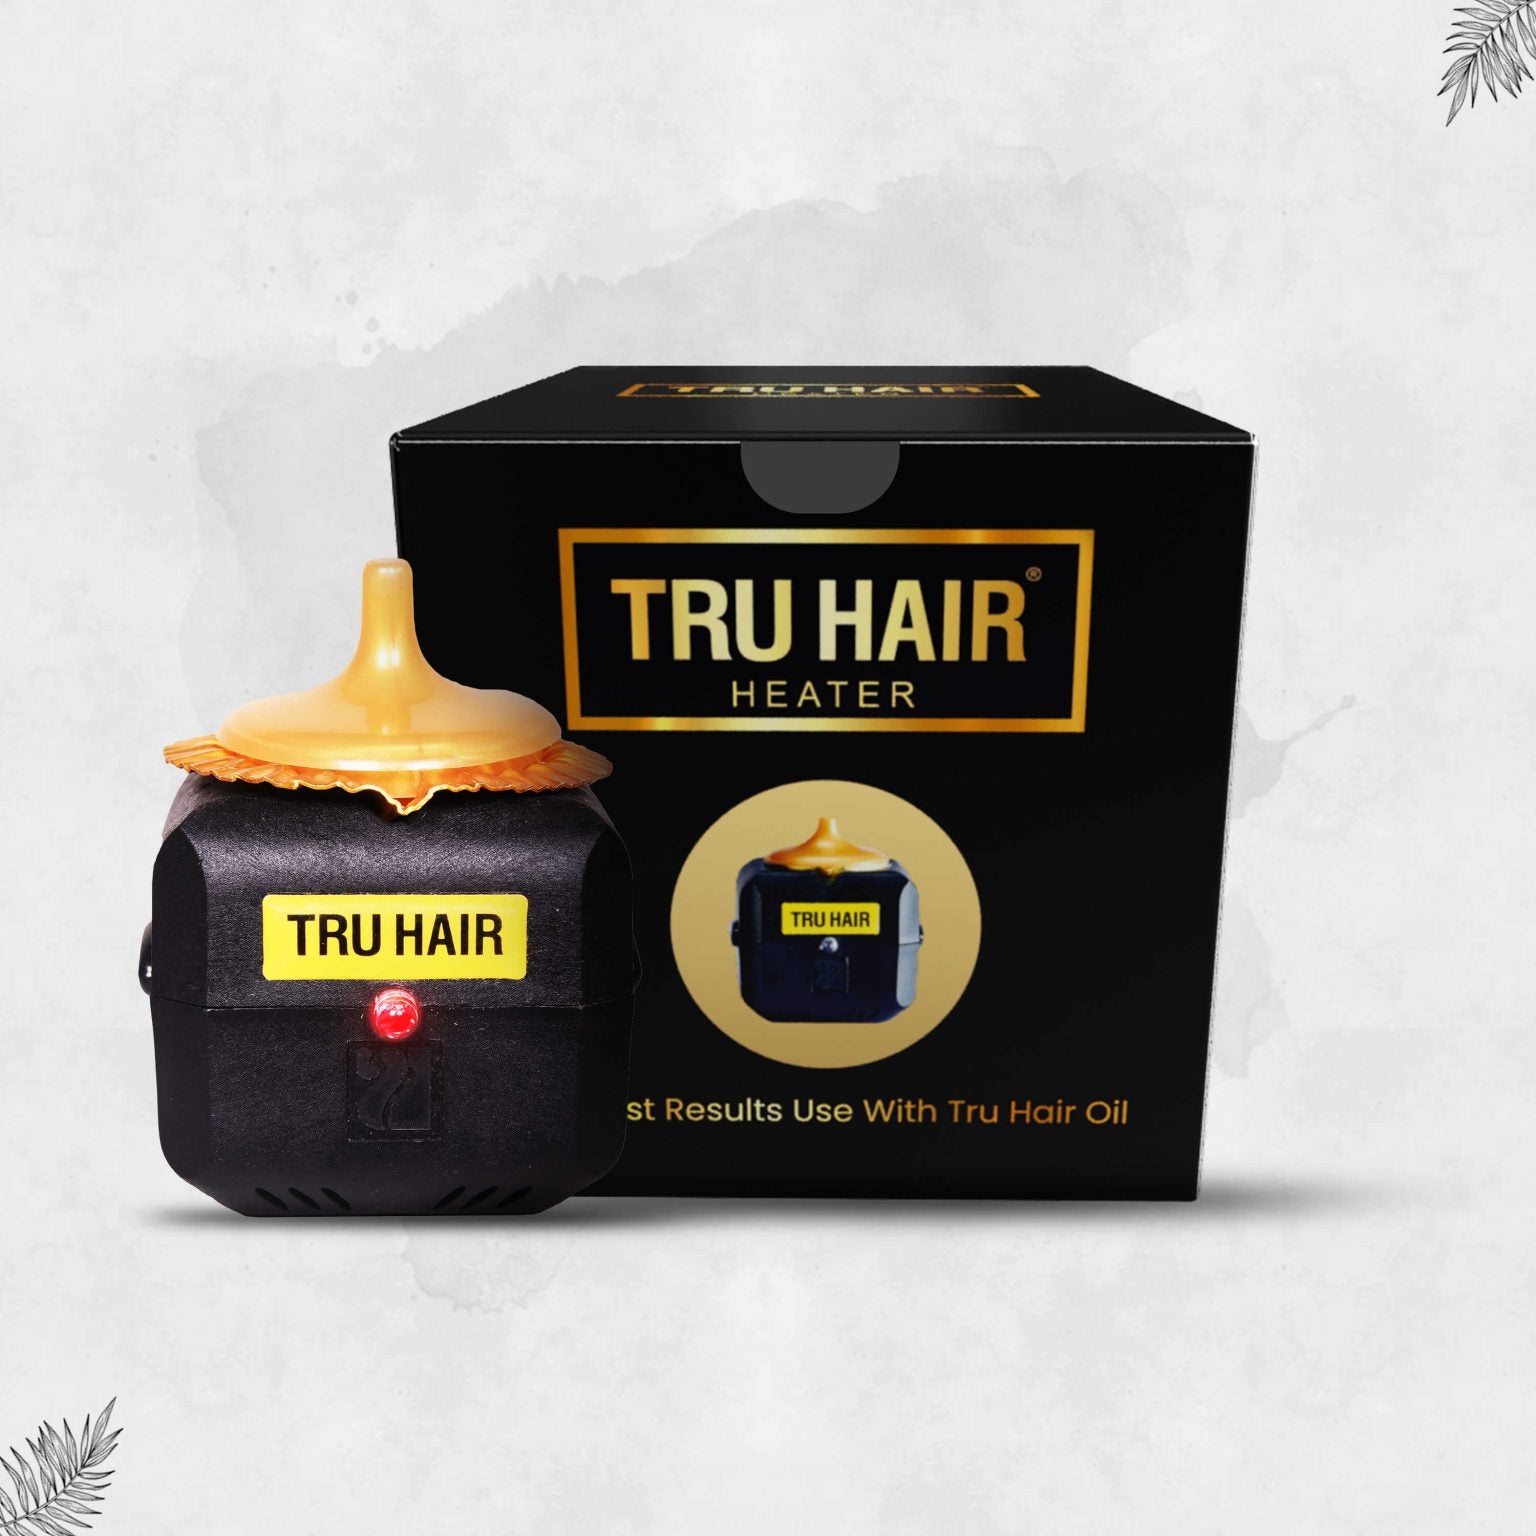 Tru Hair Oil  Worlds 1st Ayurvedic Hair Oil with Heater  Warm Oil  Therapy for Hair  YouTube